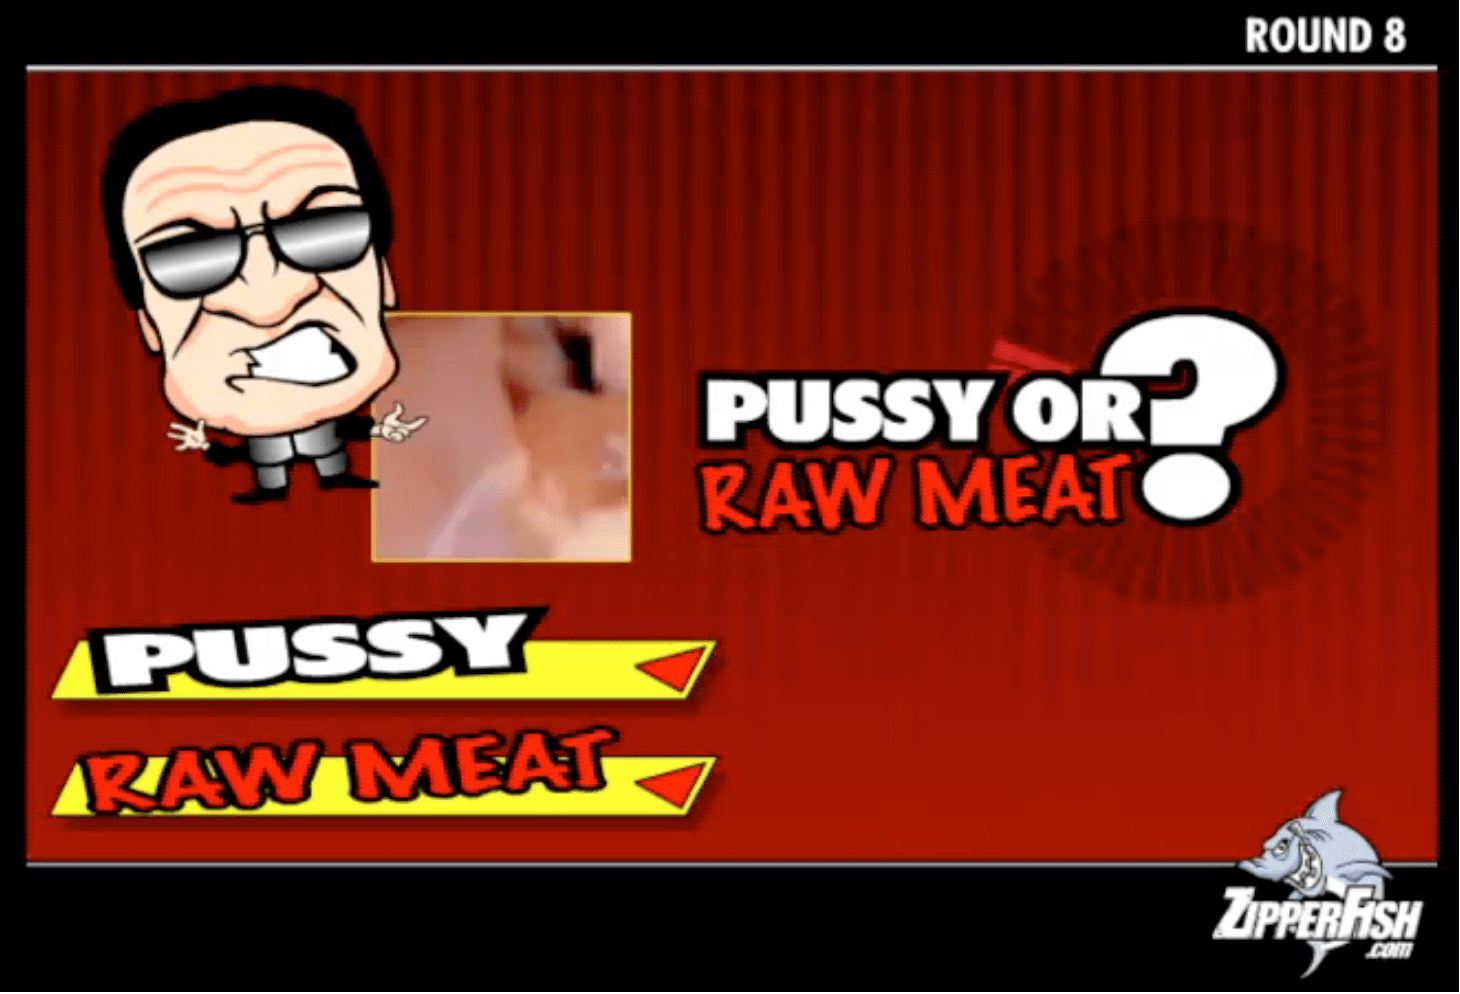 Pussy or raw meat